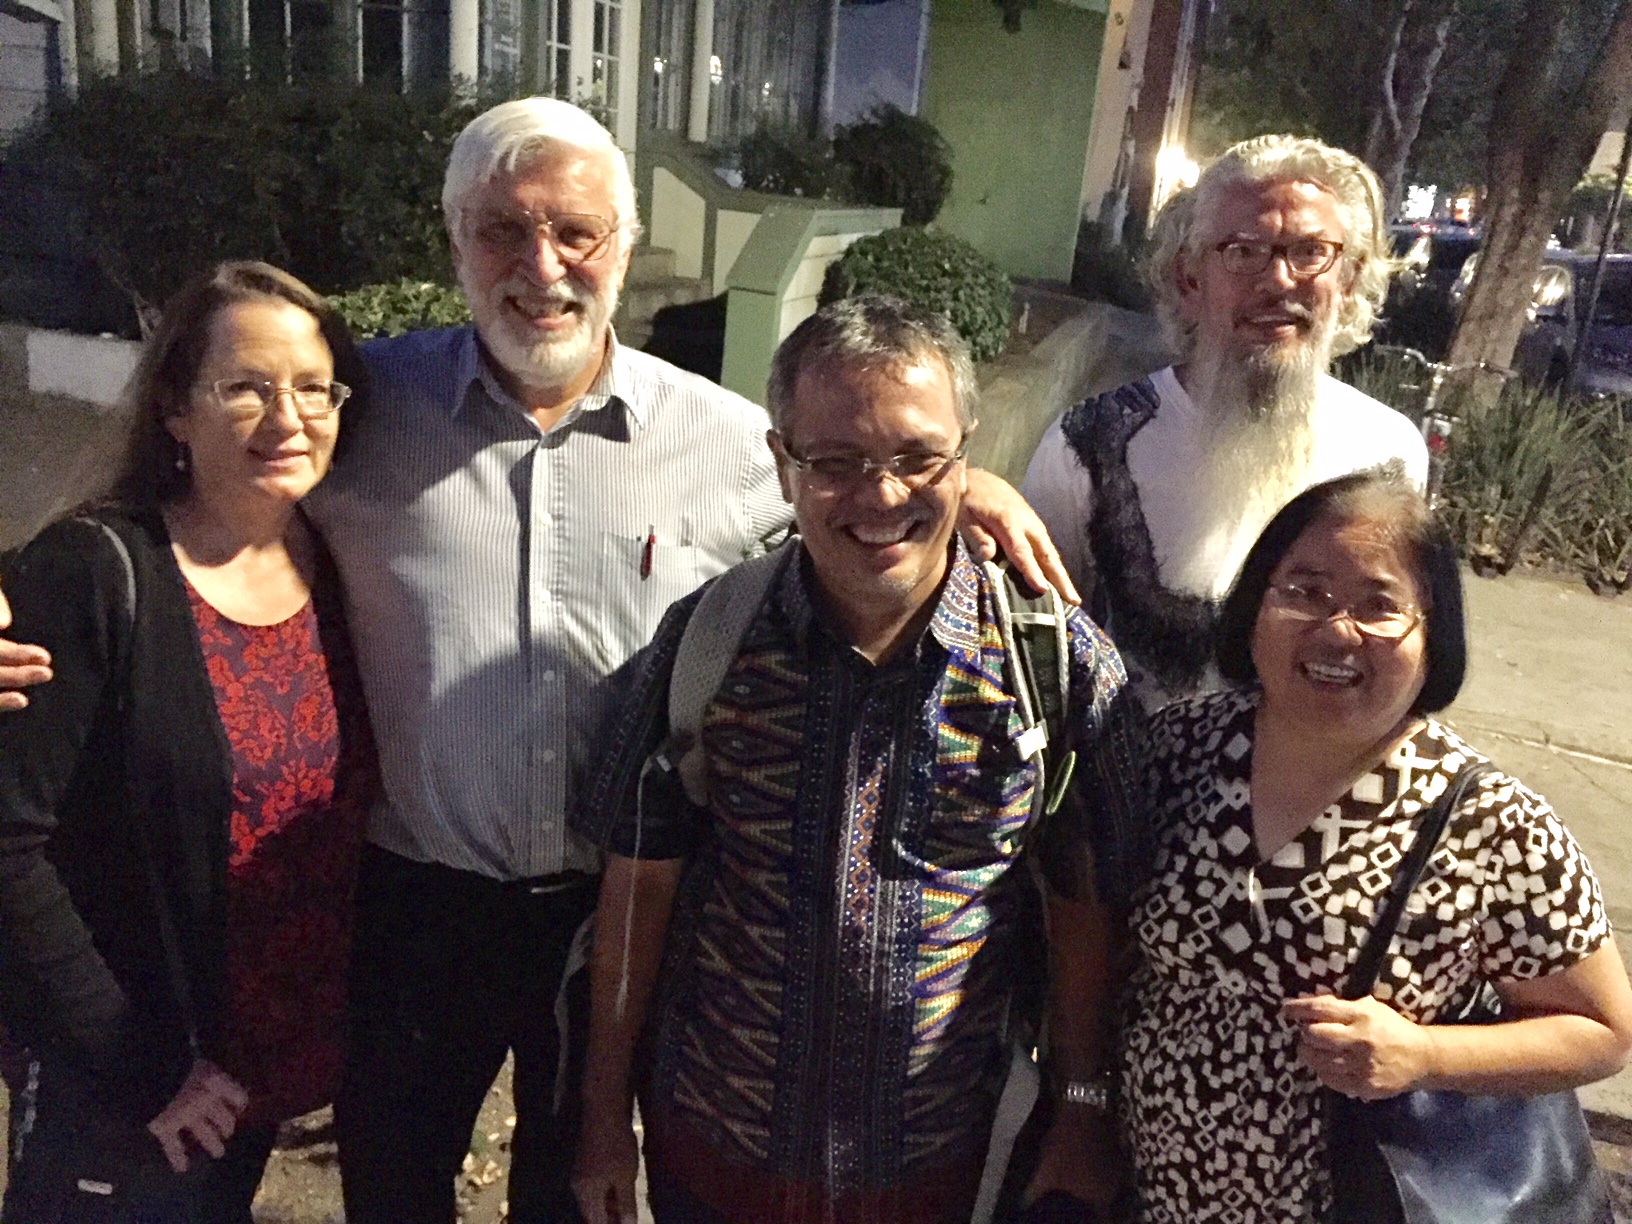 From left to right, Mary Roberts, Jeff Roberts, Jamartin Sihite, Richard Elliott, JoAnn Yee take a moment to snap a group photo during a night on the town in Davis.